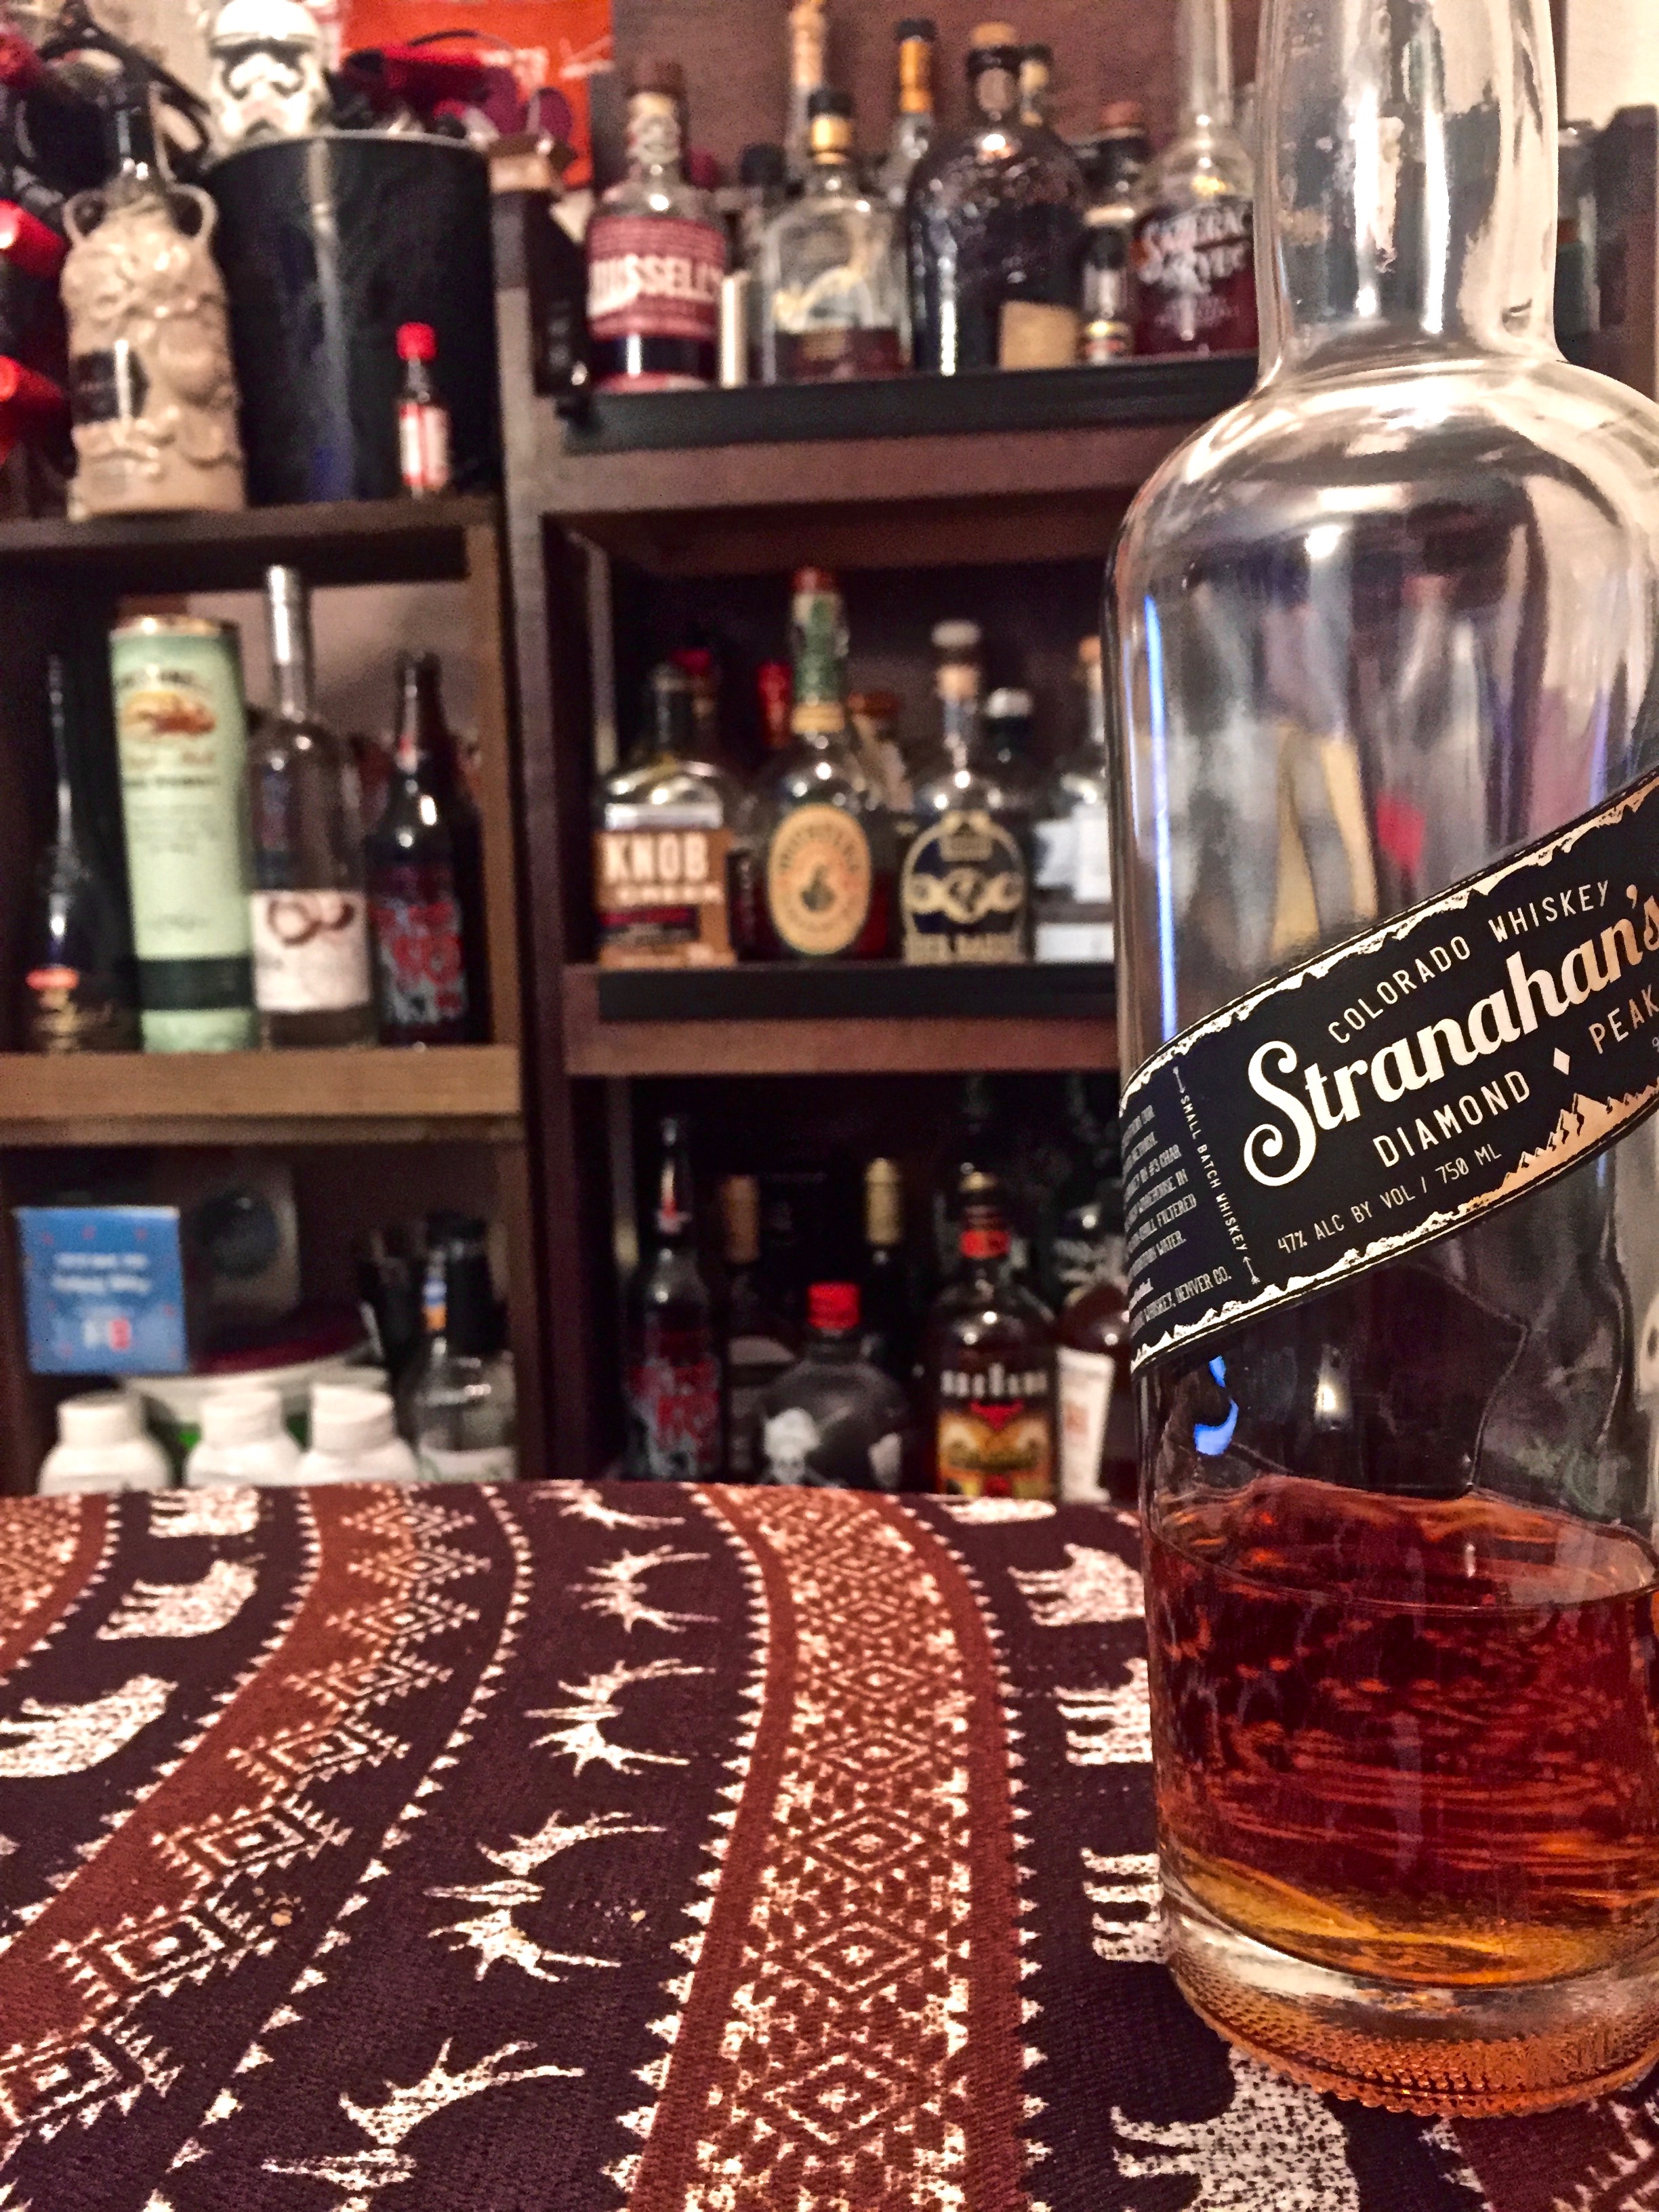 Read more about the article Stranahan’s Diamond Peak Batch #6